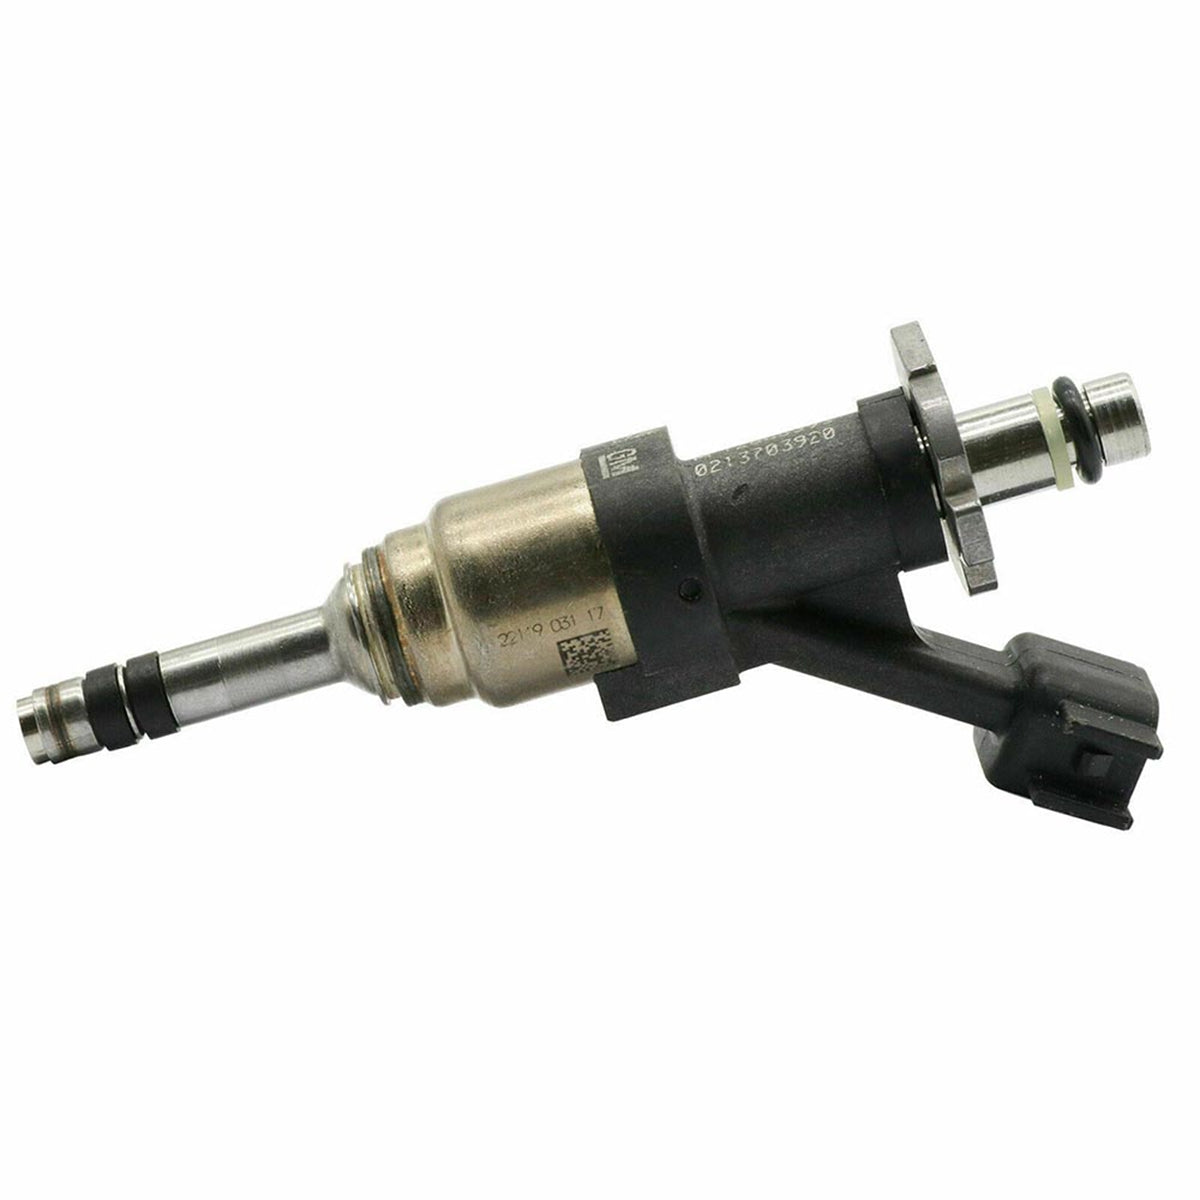 Fuel Injector 12668390, Fuel Injector for 2014-2018 Chevy GMC, Daysyore Fuel Injector, Auto Fuel Injector, Car Fuel Injector